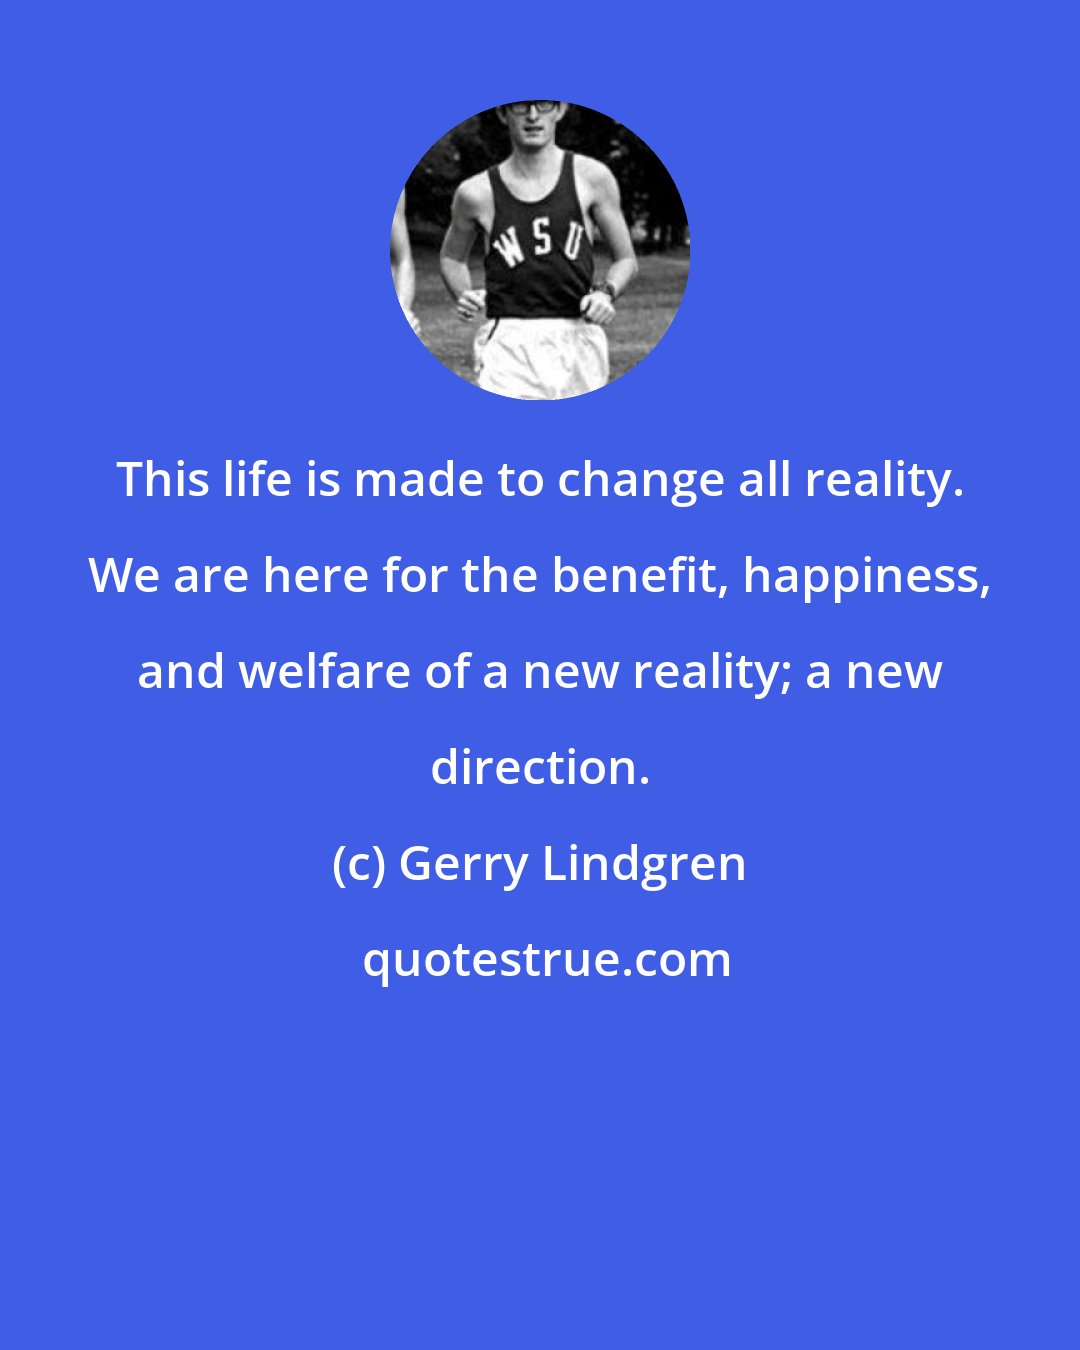 Gerry Lindgren: This life is made to change all reality. We are here for the benefit, happiness, and welfare of a new reality; a new direction.